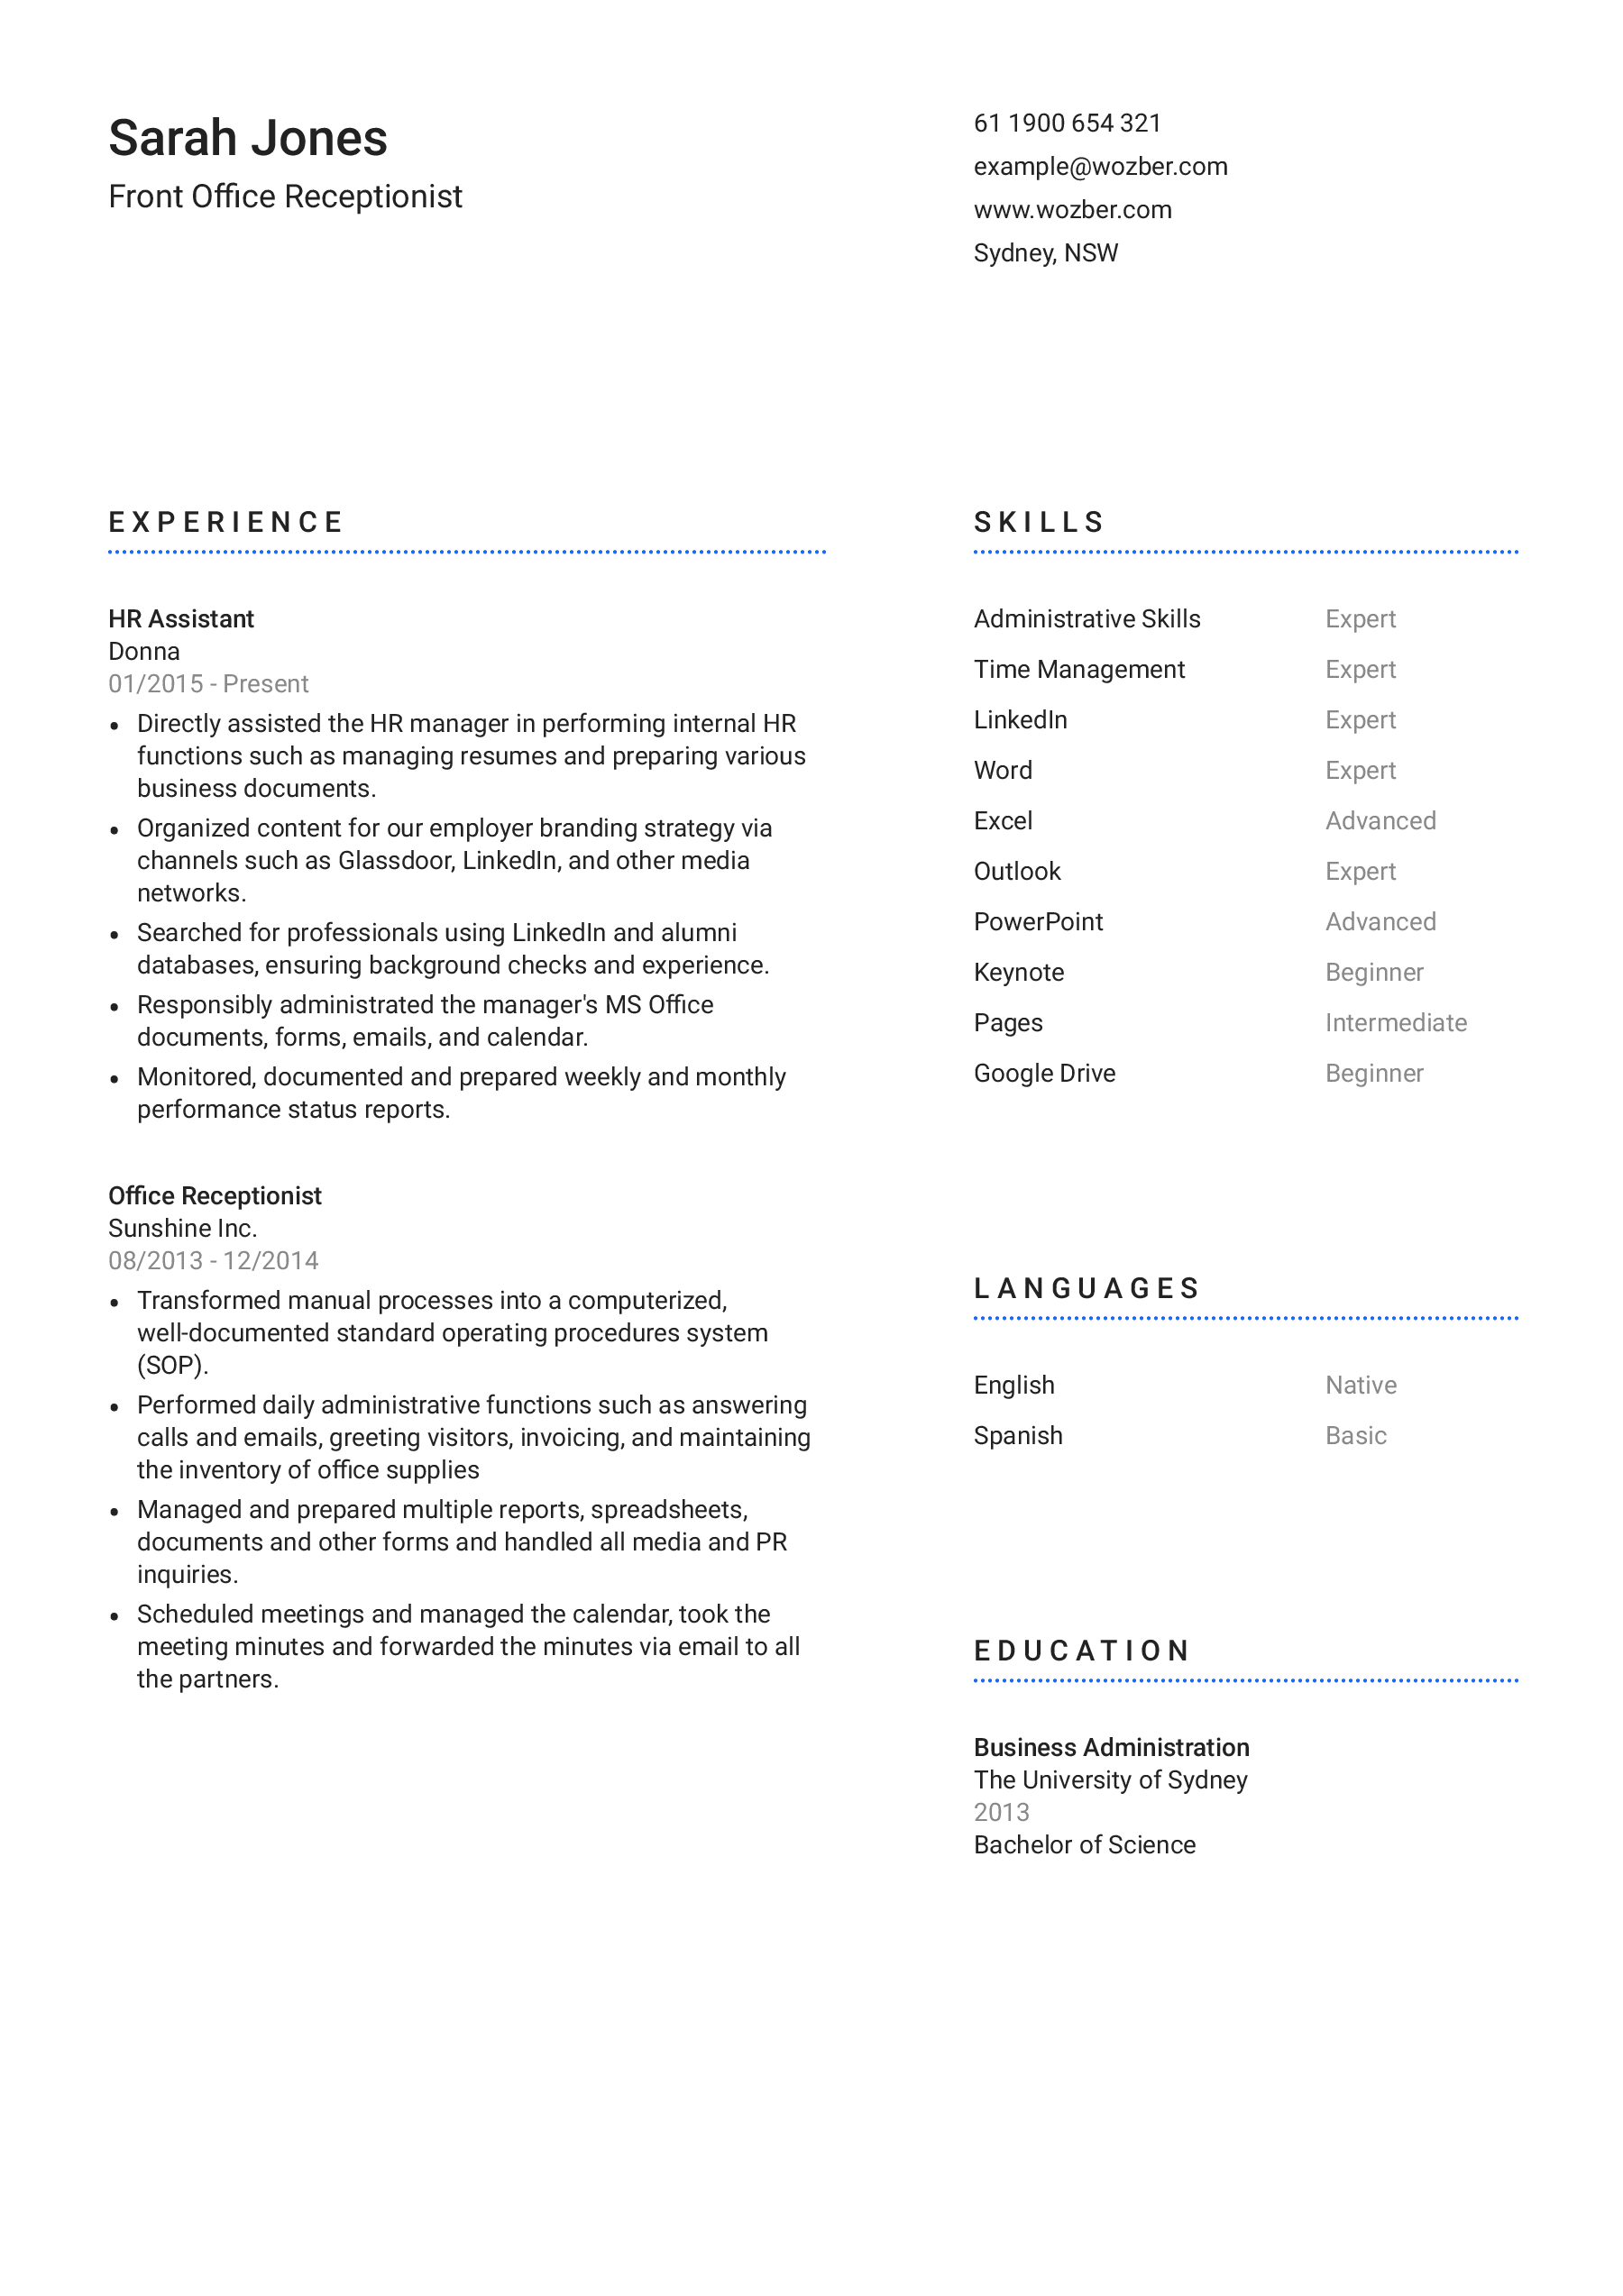 examples of resume with accomplishments